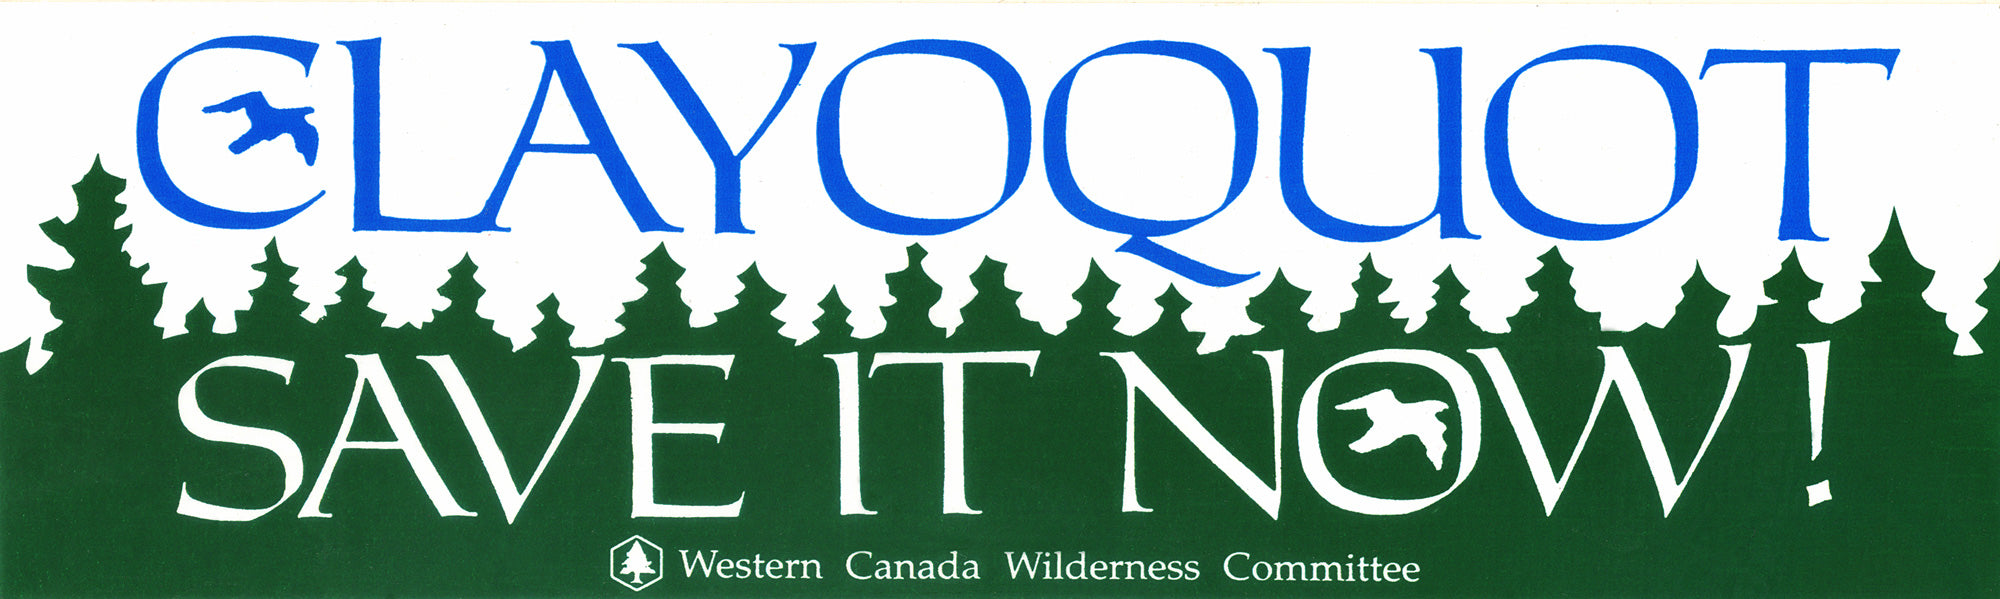 A sticker with text that says "Clayoquot - Save it Now!" There is graphic on the sticker of forests and birds, and a logo of the Wilderness Committee at the bottom. End of image description.